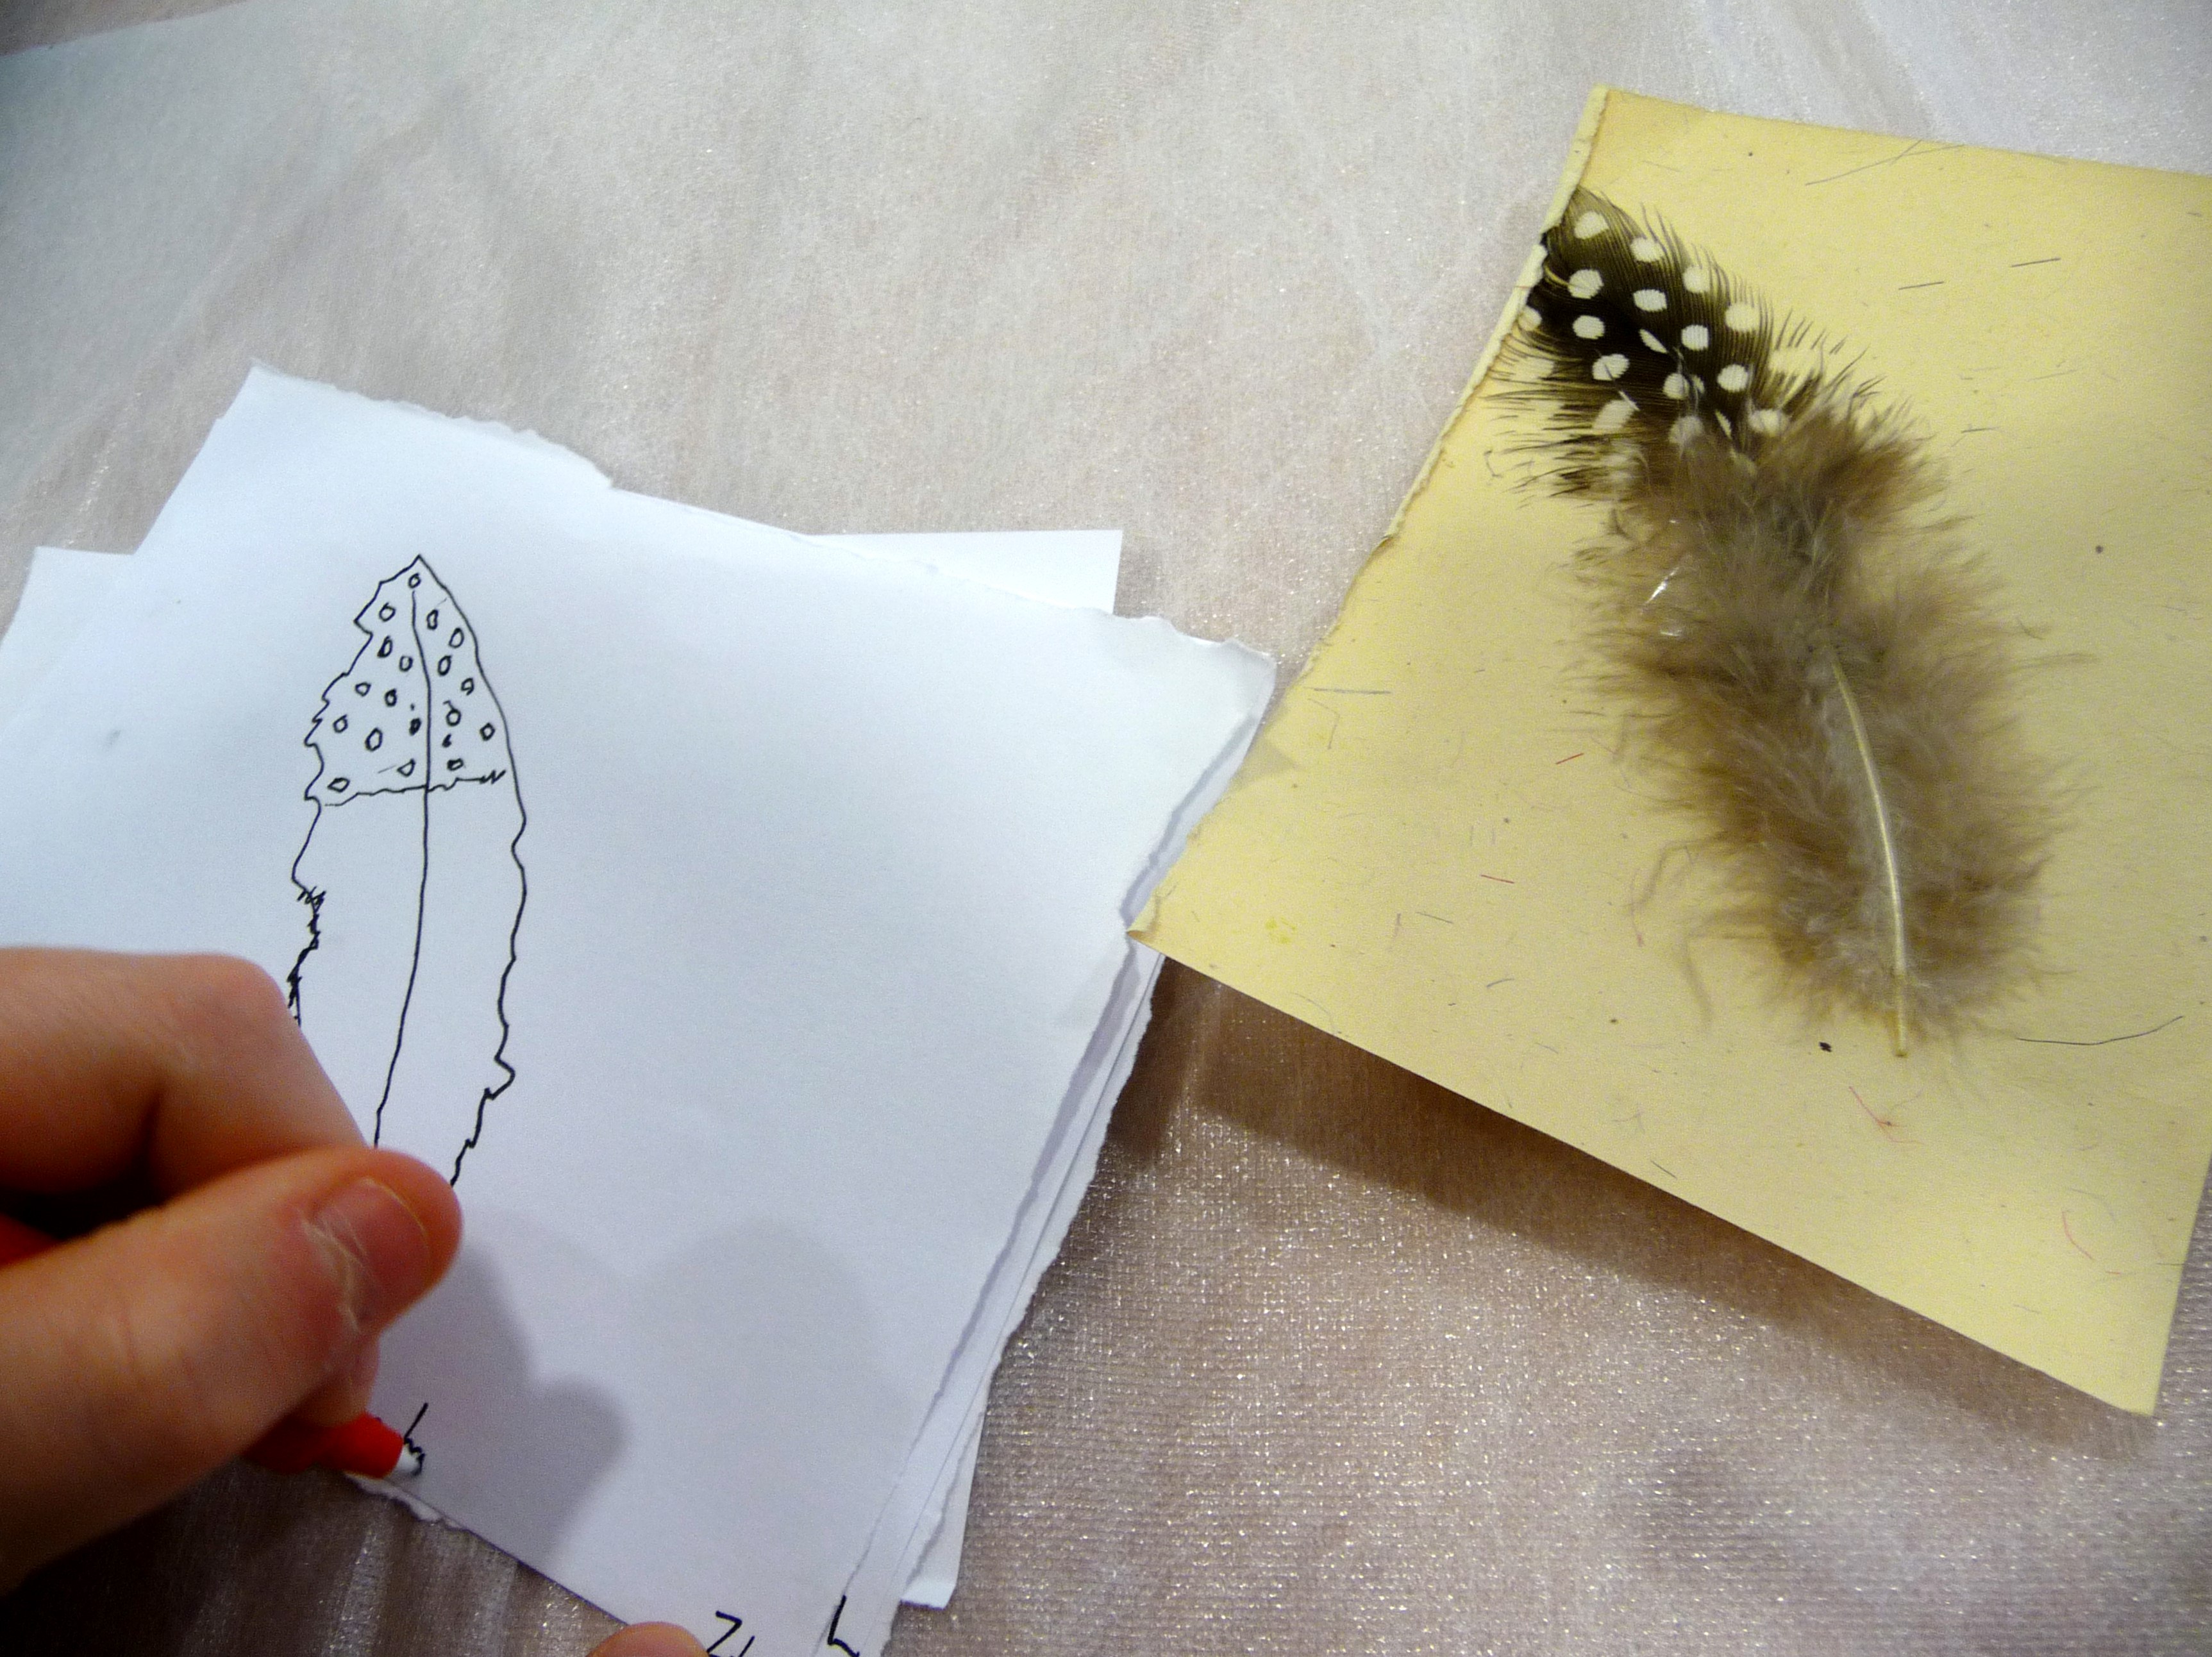 we had one minute to draw a feather